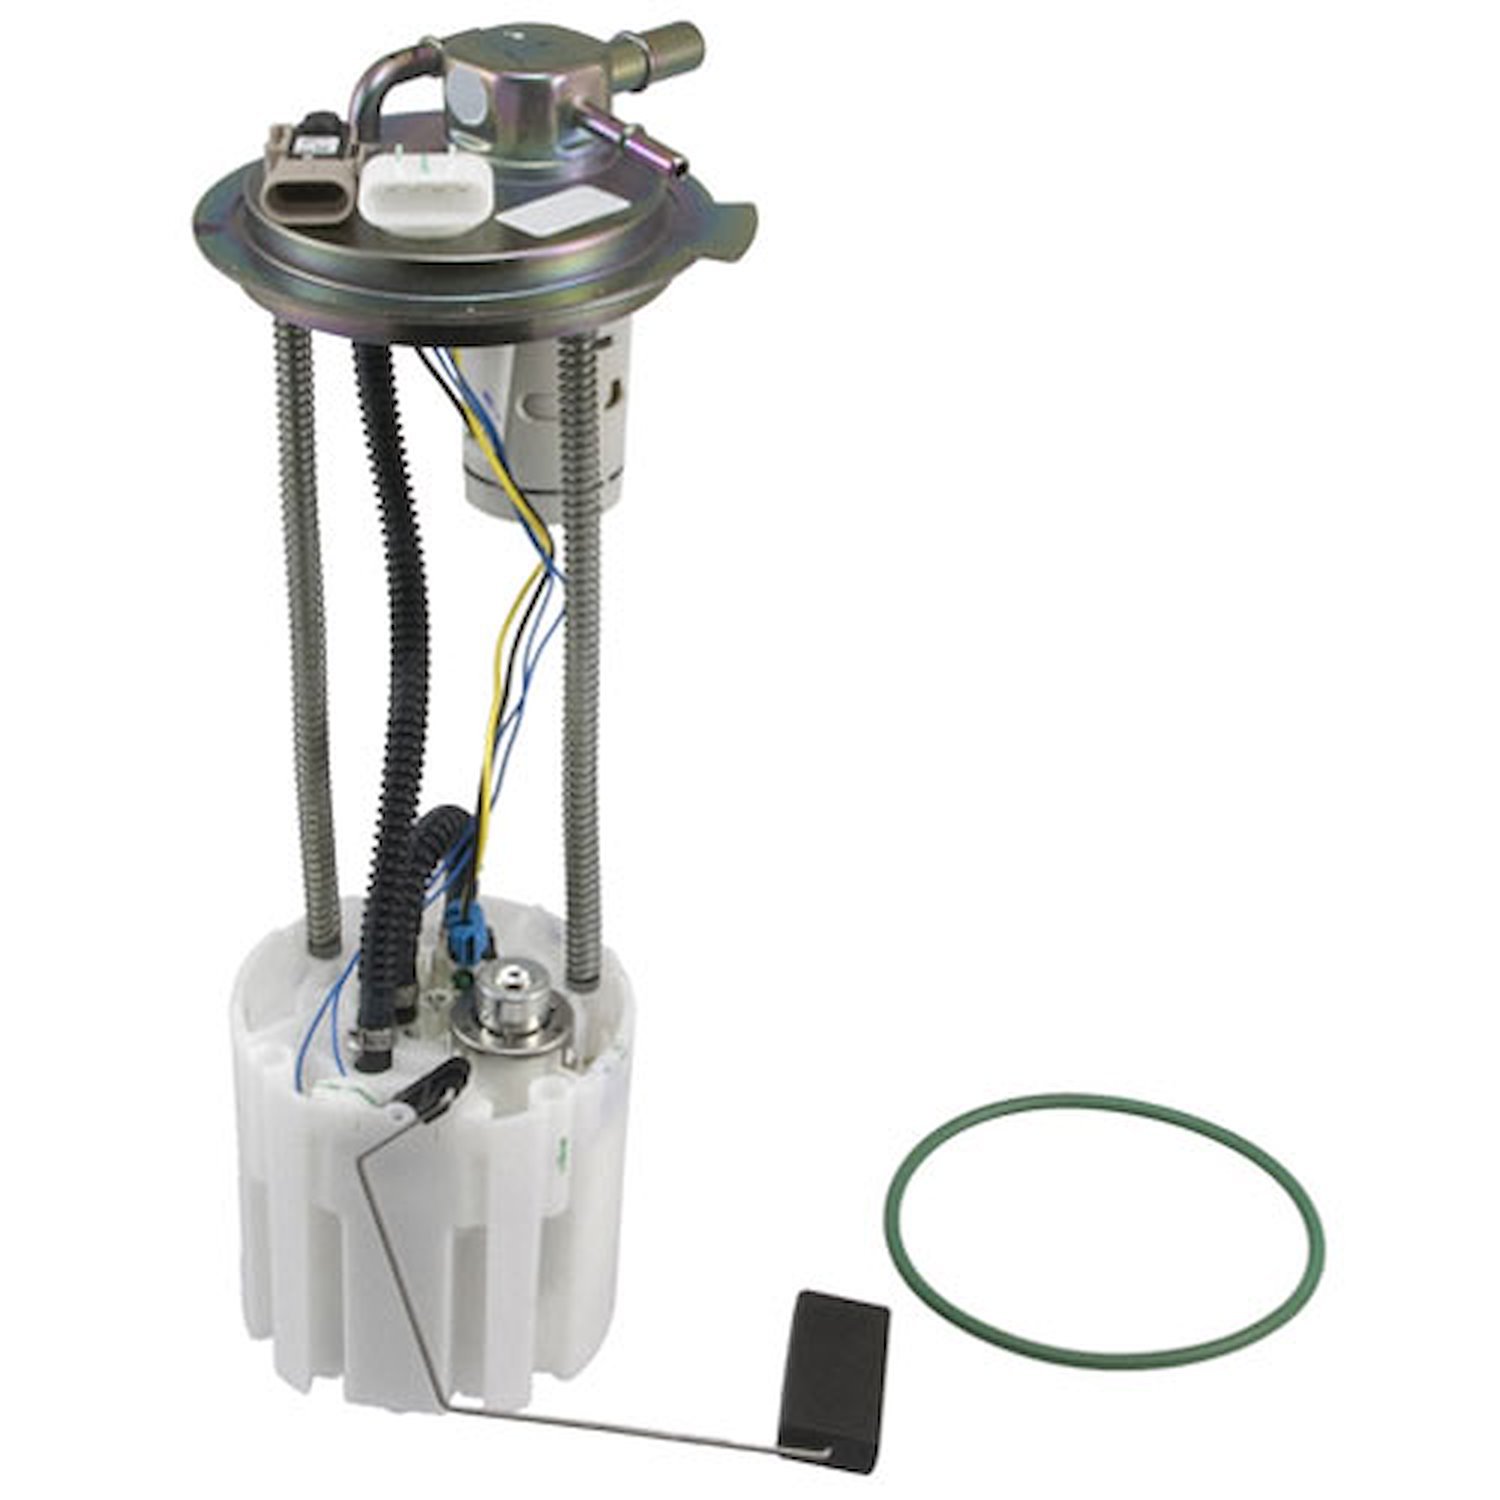 OE GM Replacement Electric Fuel Pump Module Assembly 2007-08 Chevrolet Silverado 1500 5.3L V8